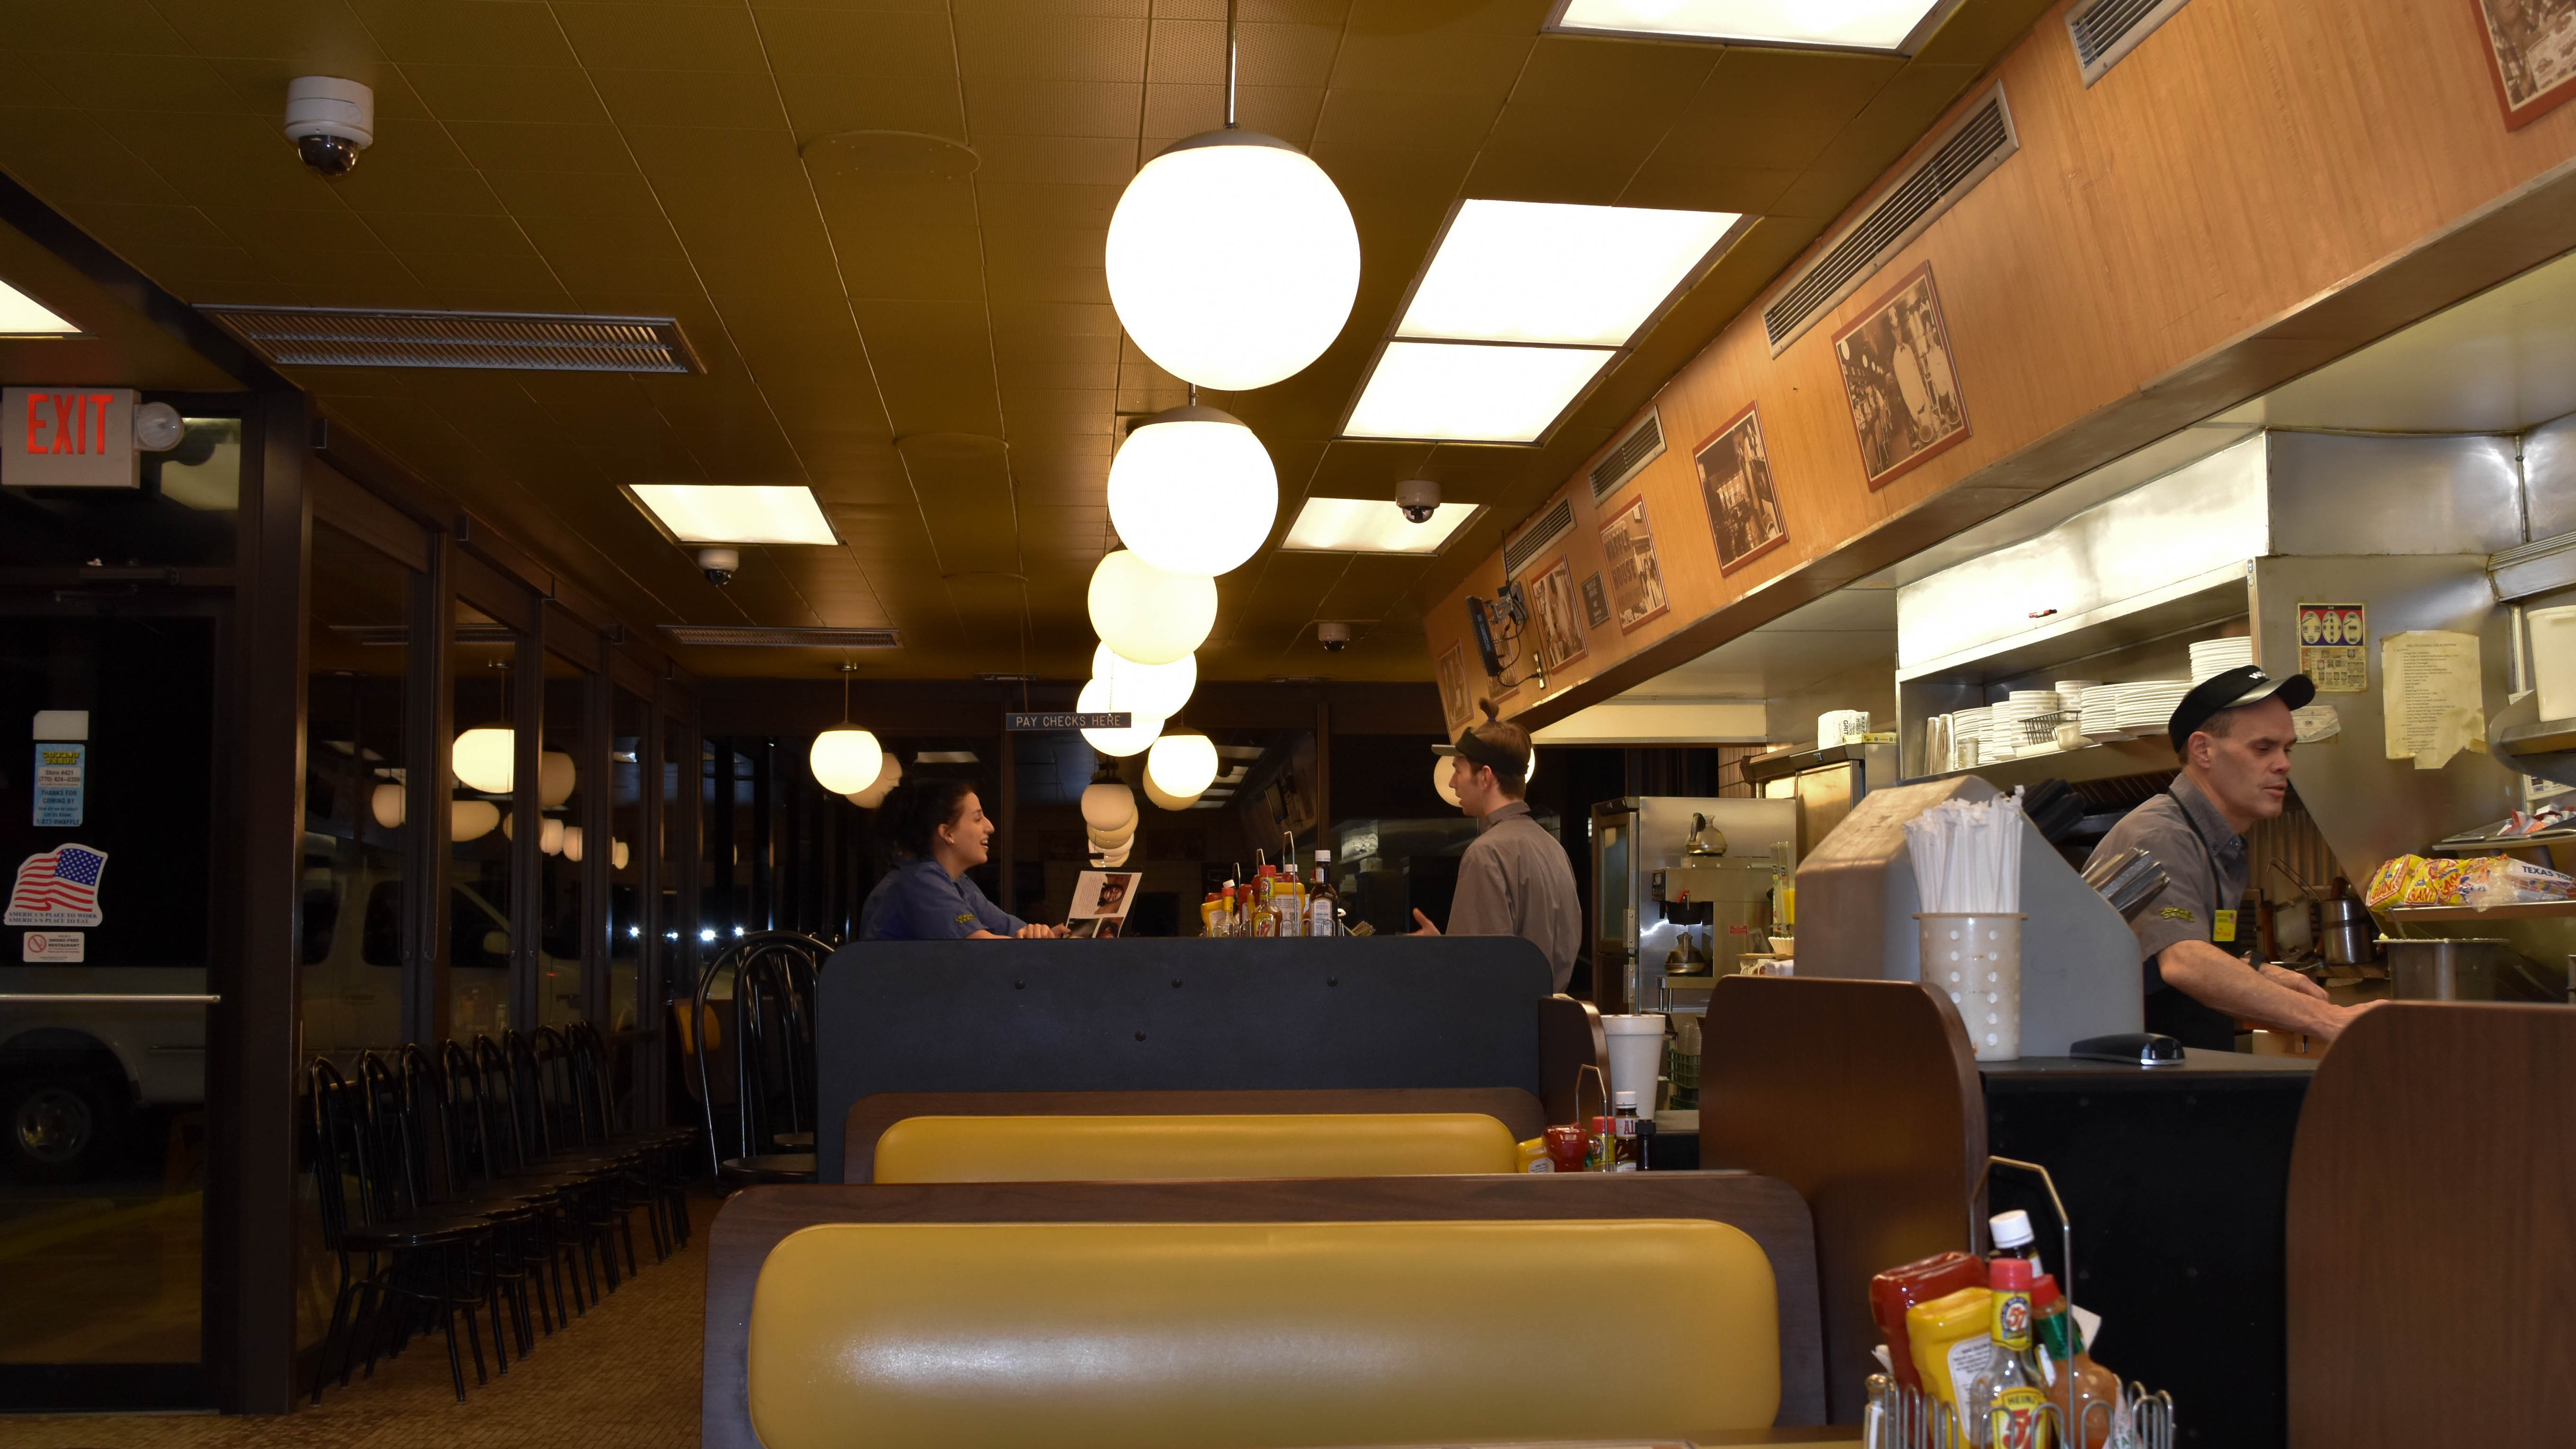 Best of KSU: Waffle House, a home away from home